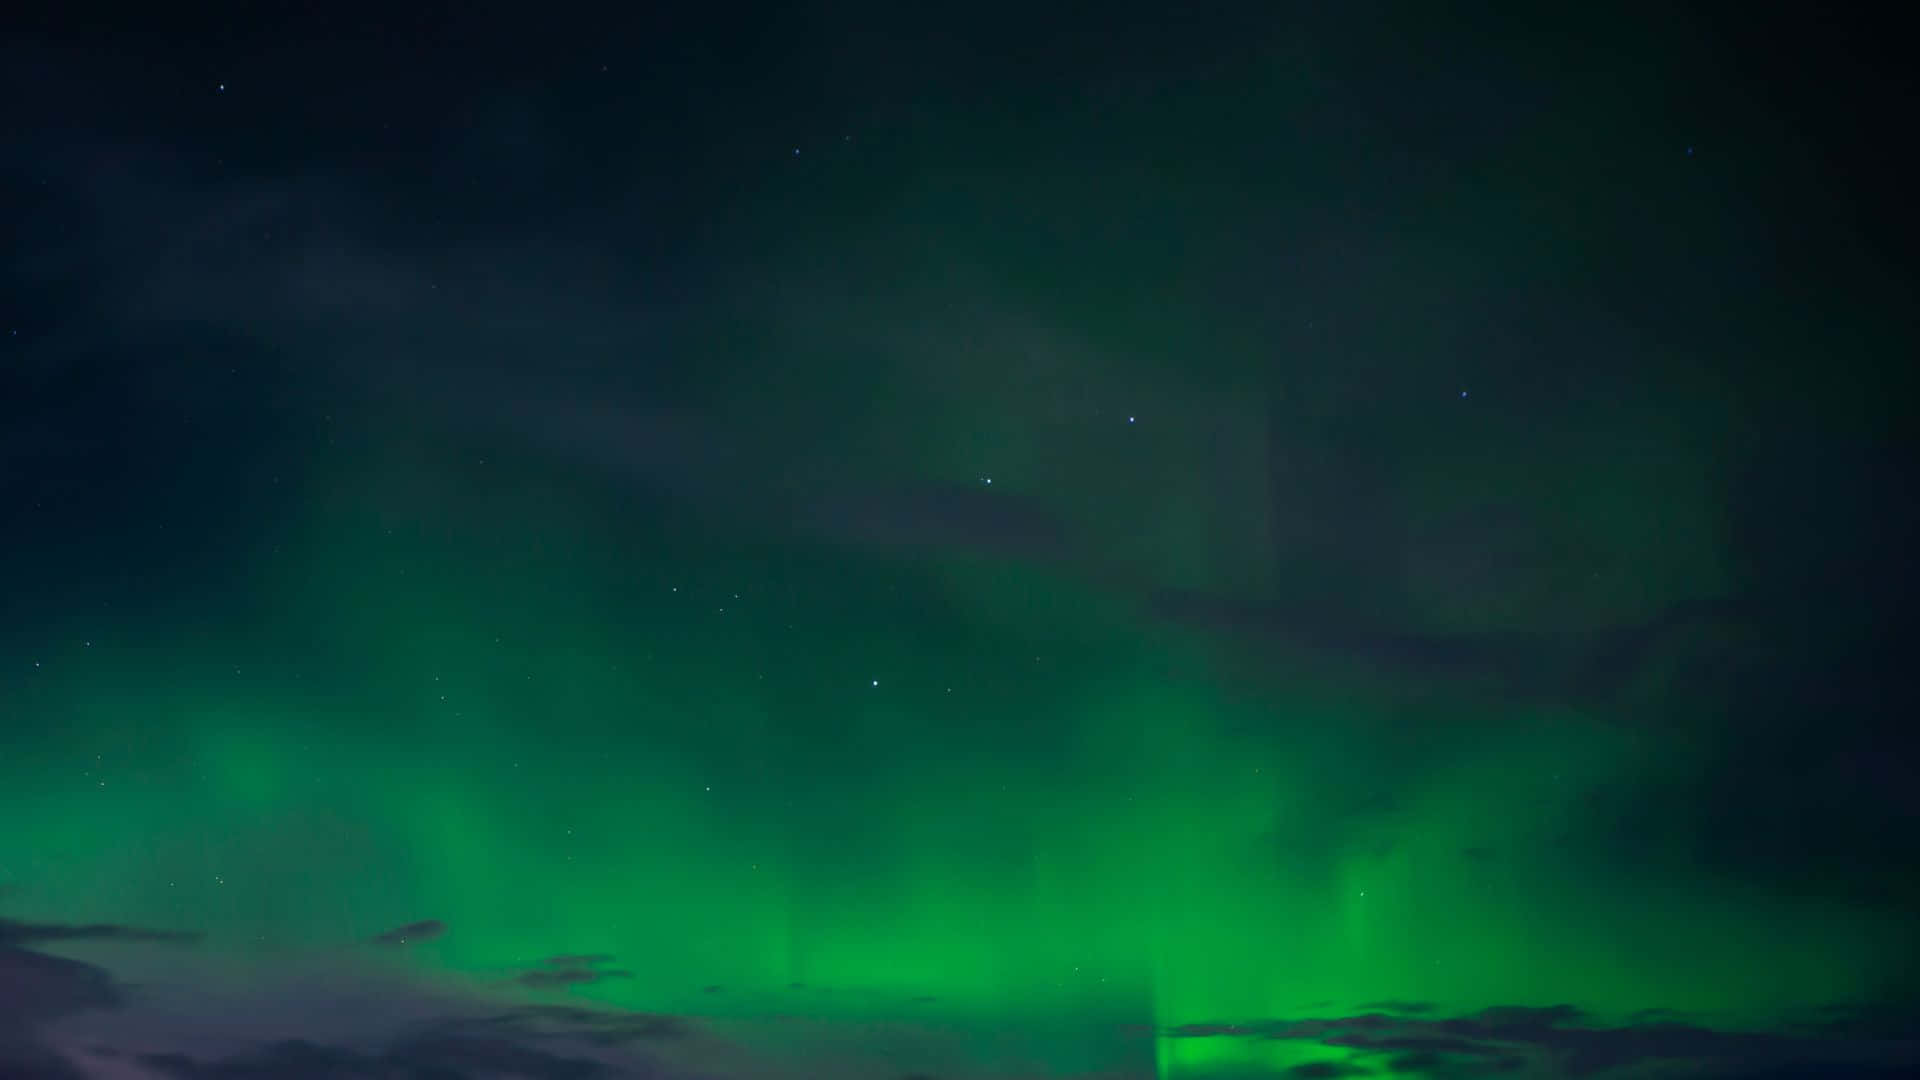 Magical night sky view of the Northern Lights